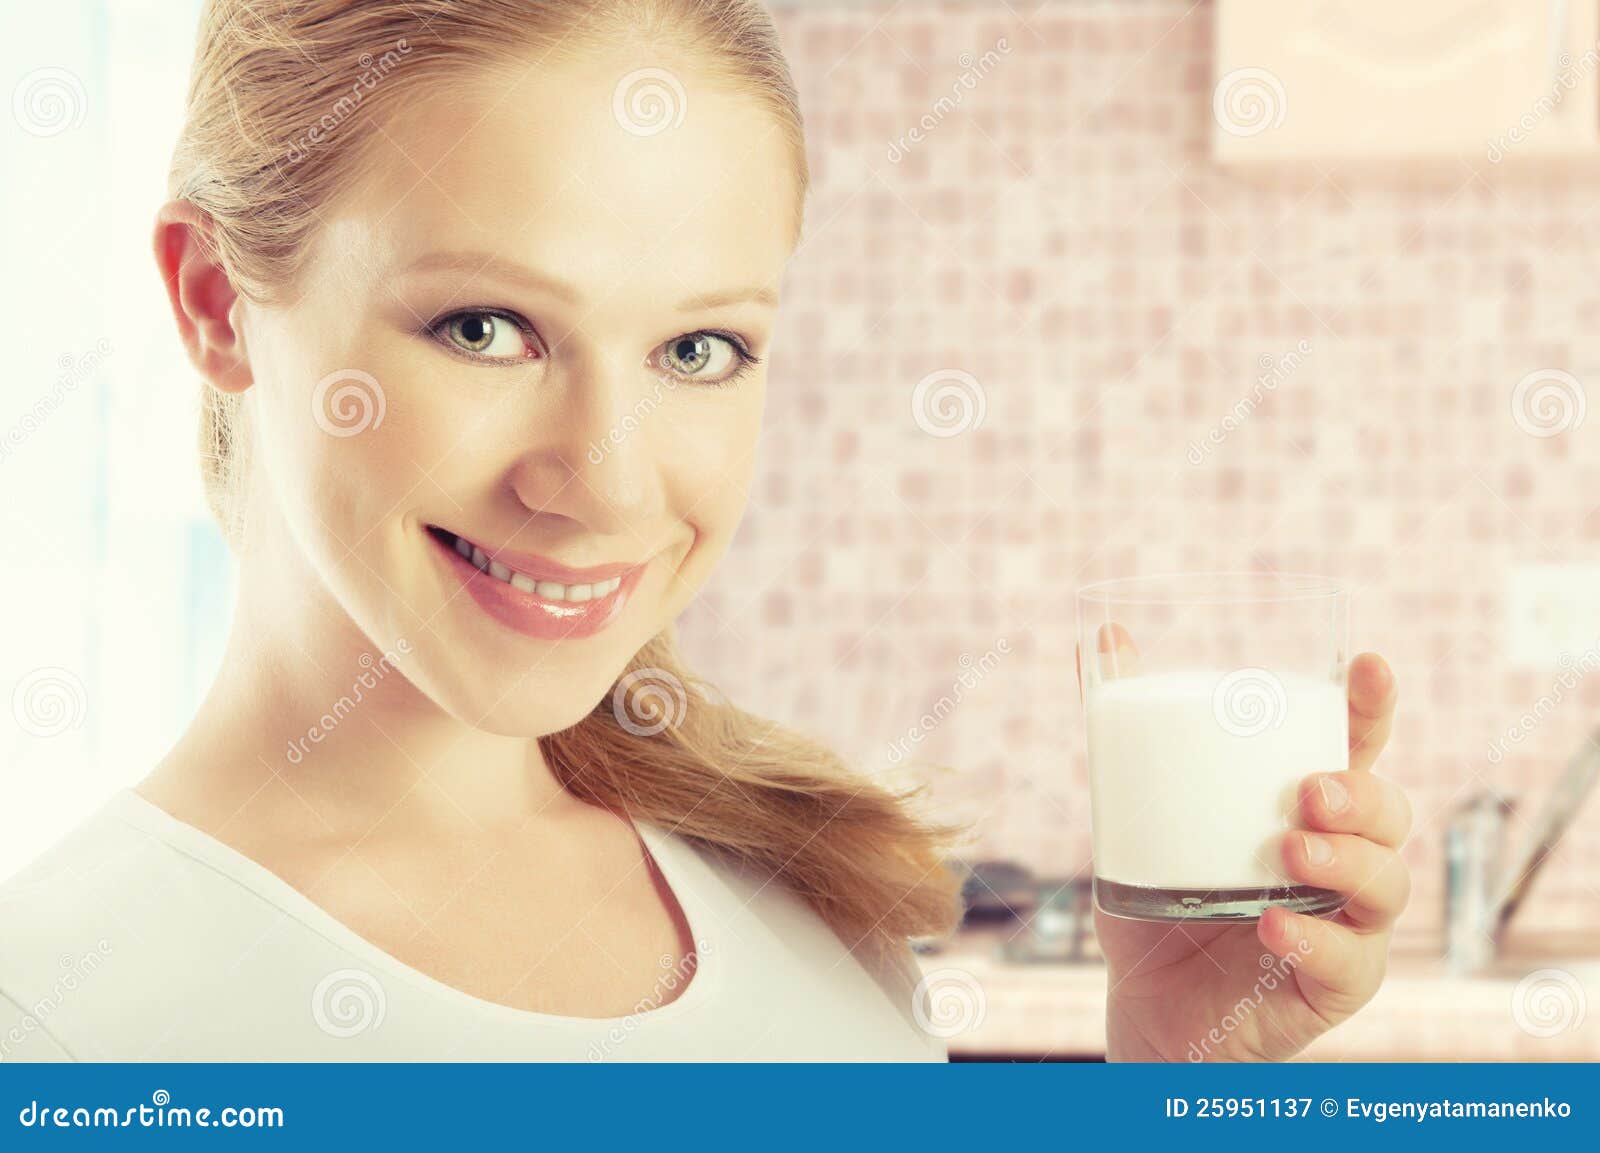  Free Stock Photography: Beautiful healthy girl with a glass of milk